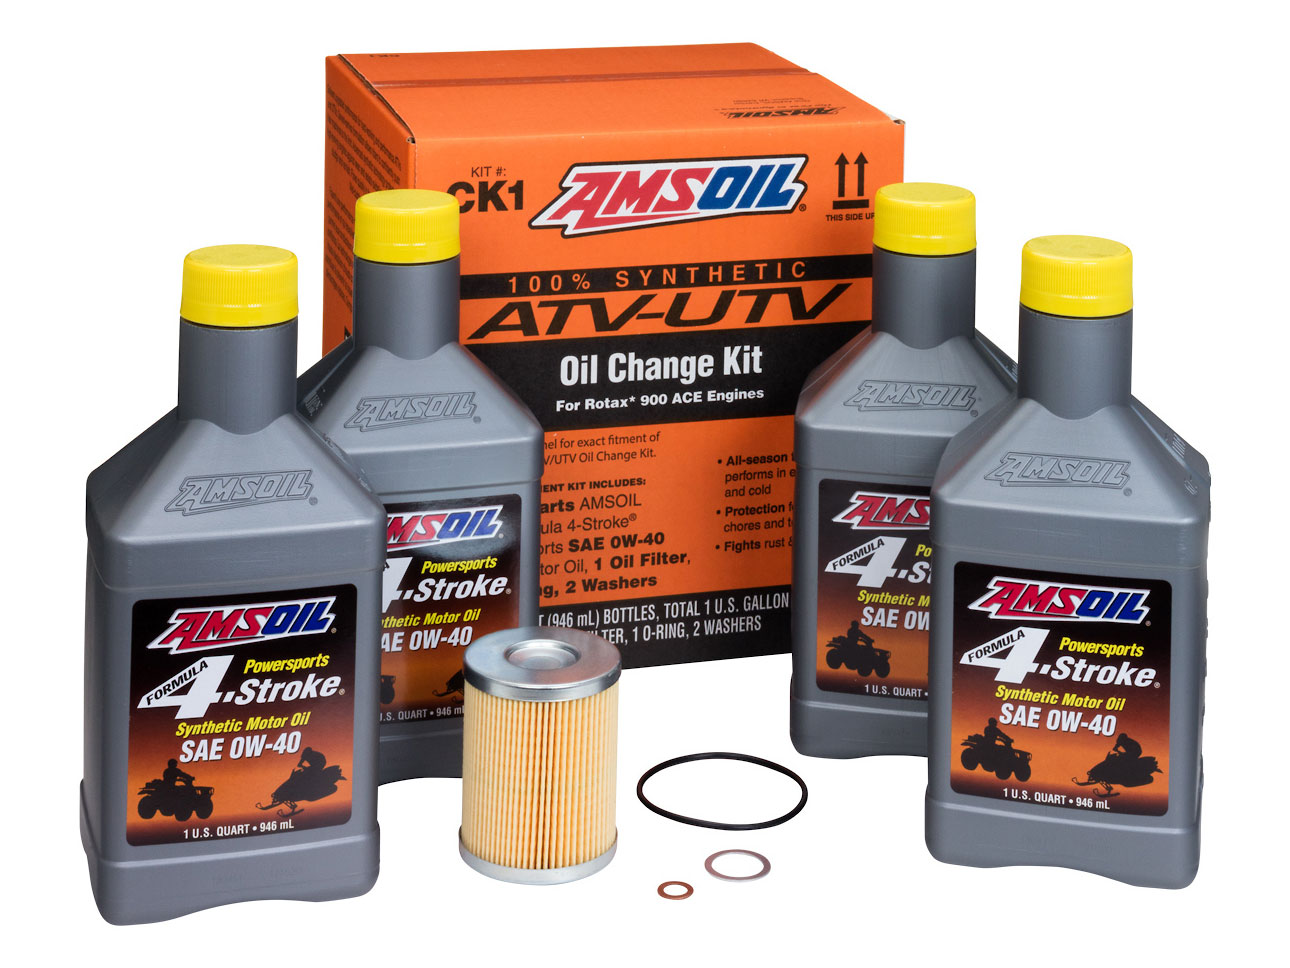 AMSOIL and KR4 Bring Brand-New AMSOIL Garage to GNCC Series - GNCC